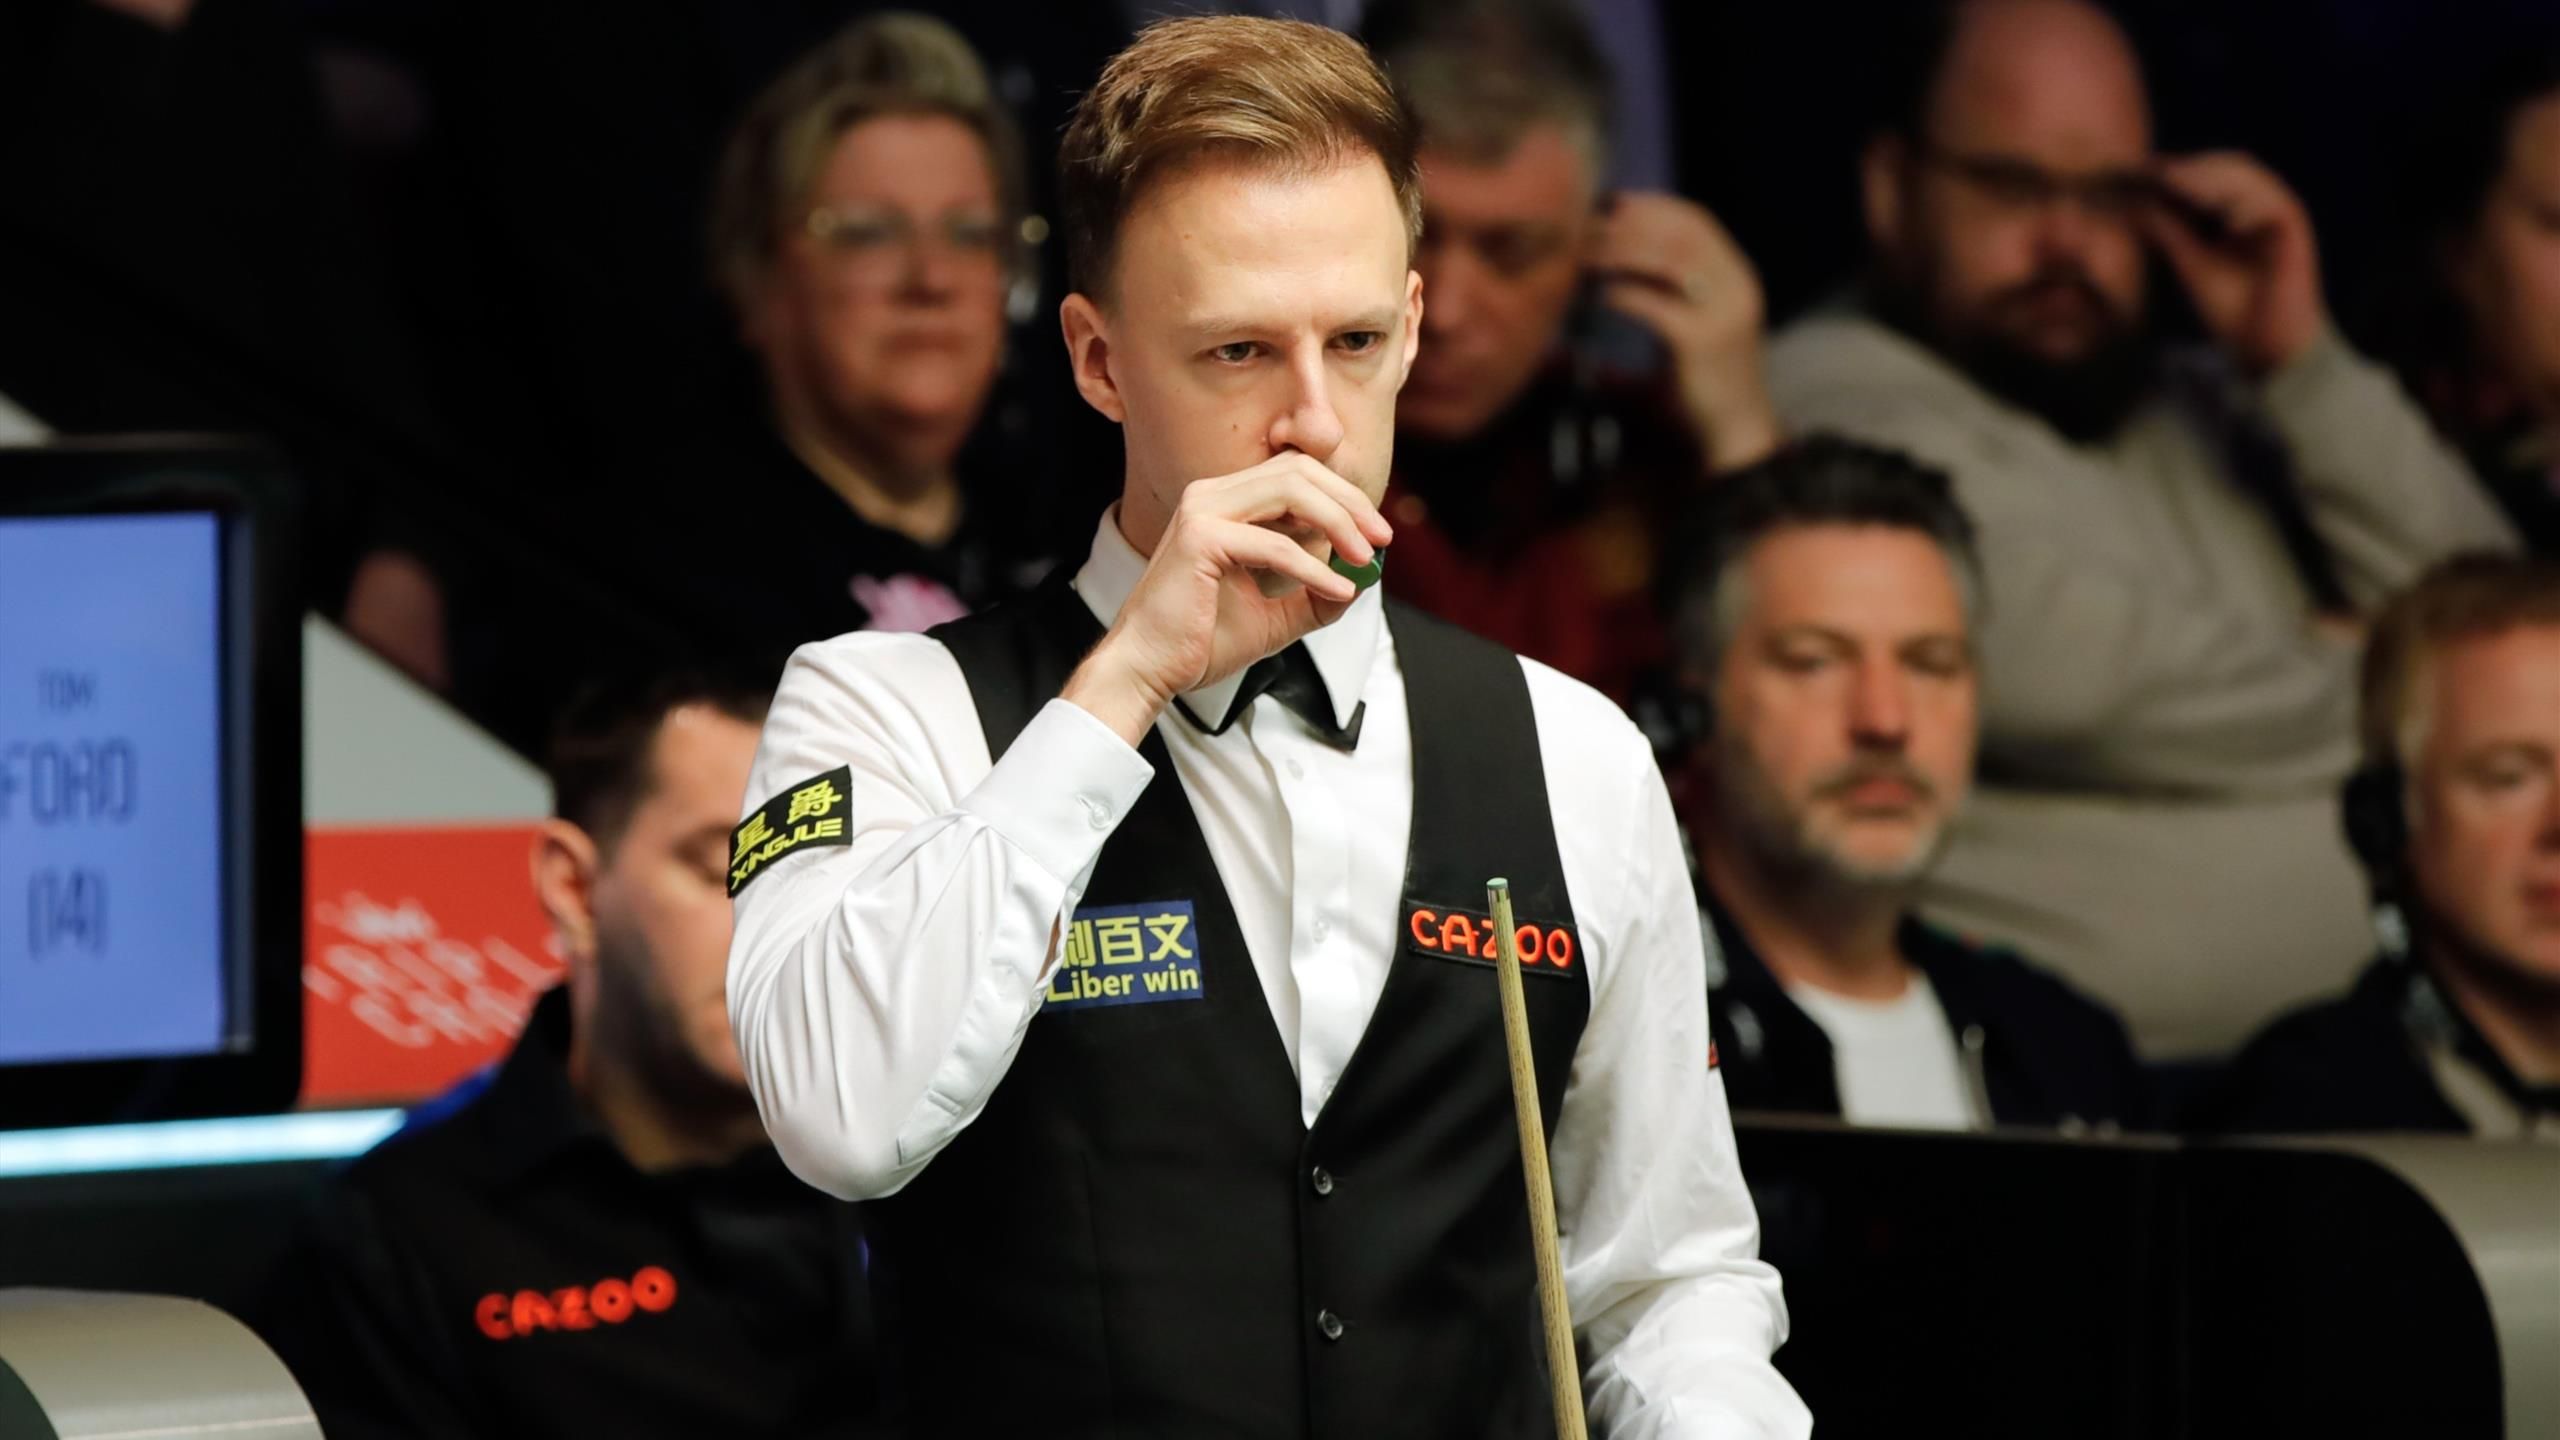 Watch Judd Trump in action live at the World Snooker Championship, followed by Ronnie O’Sullivan taking center stage at the Crucible